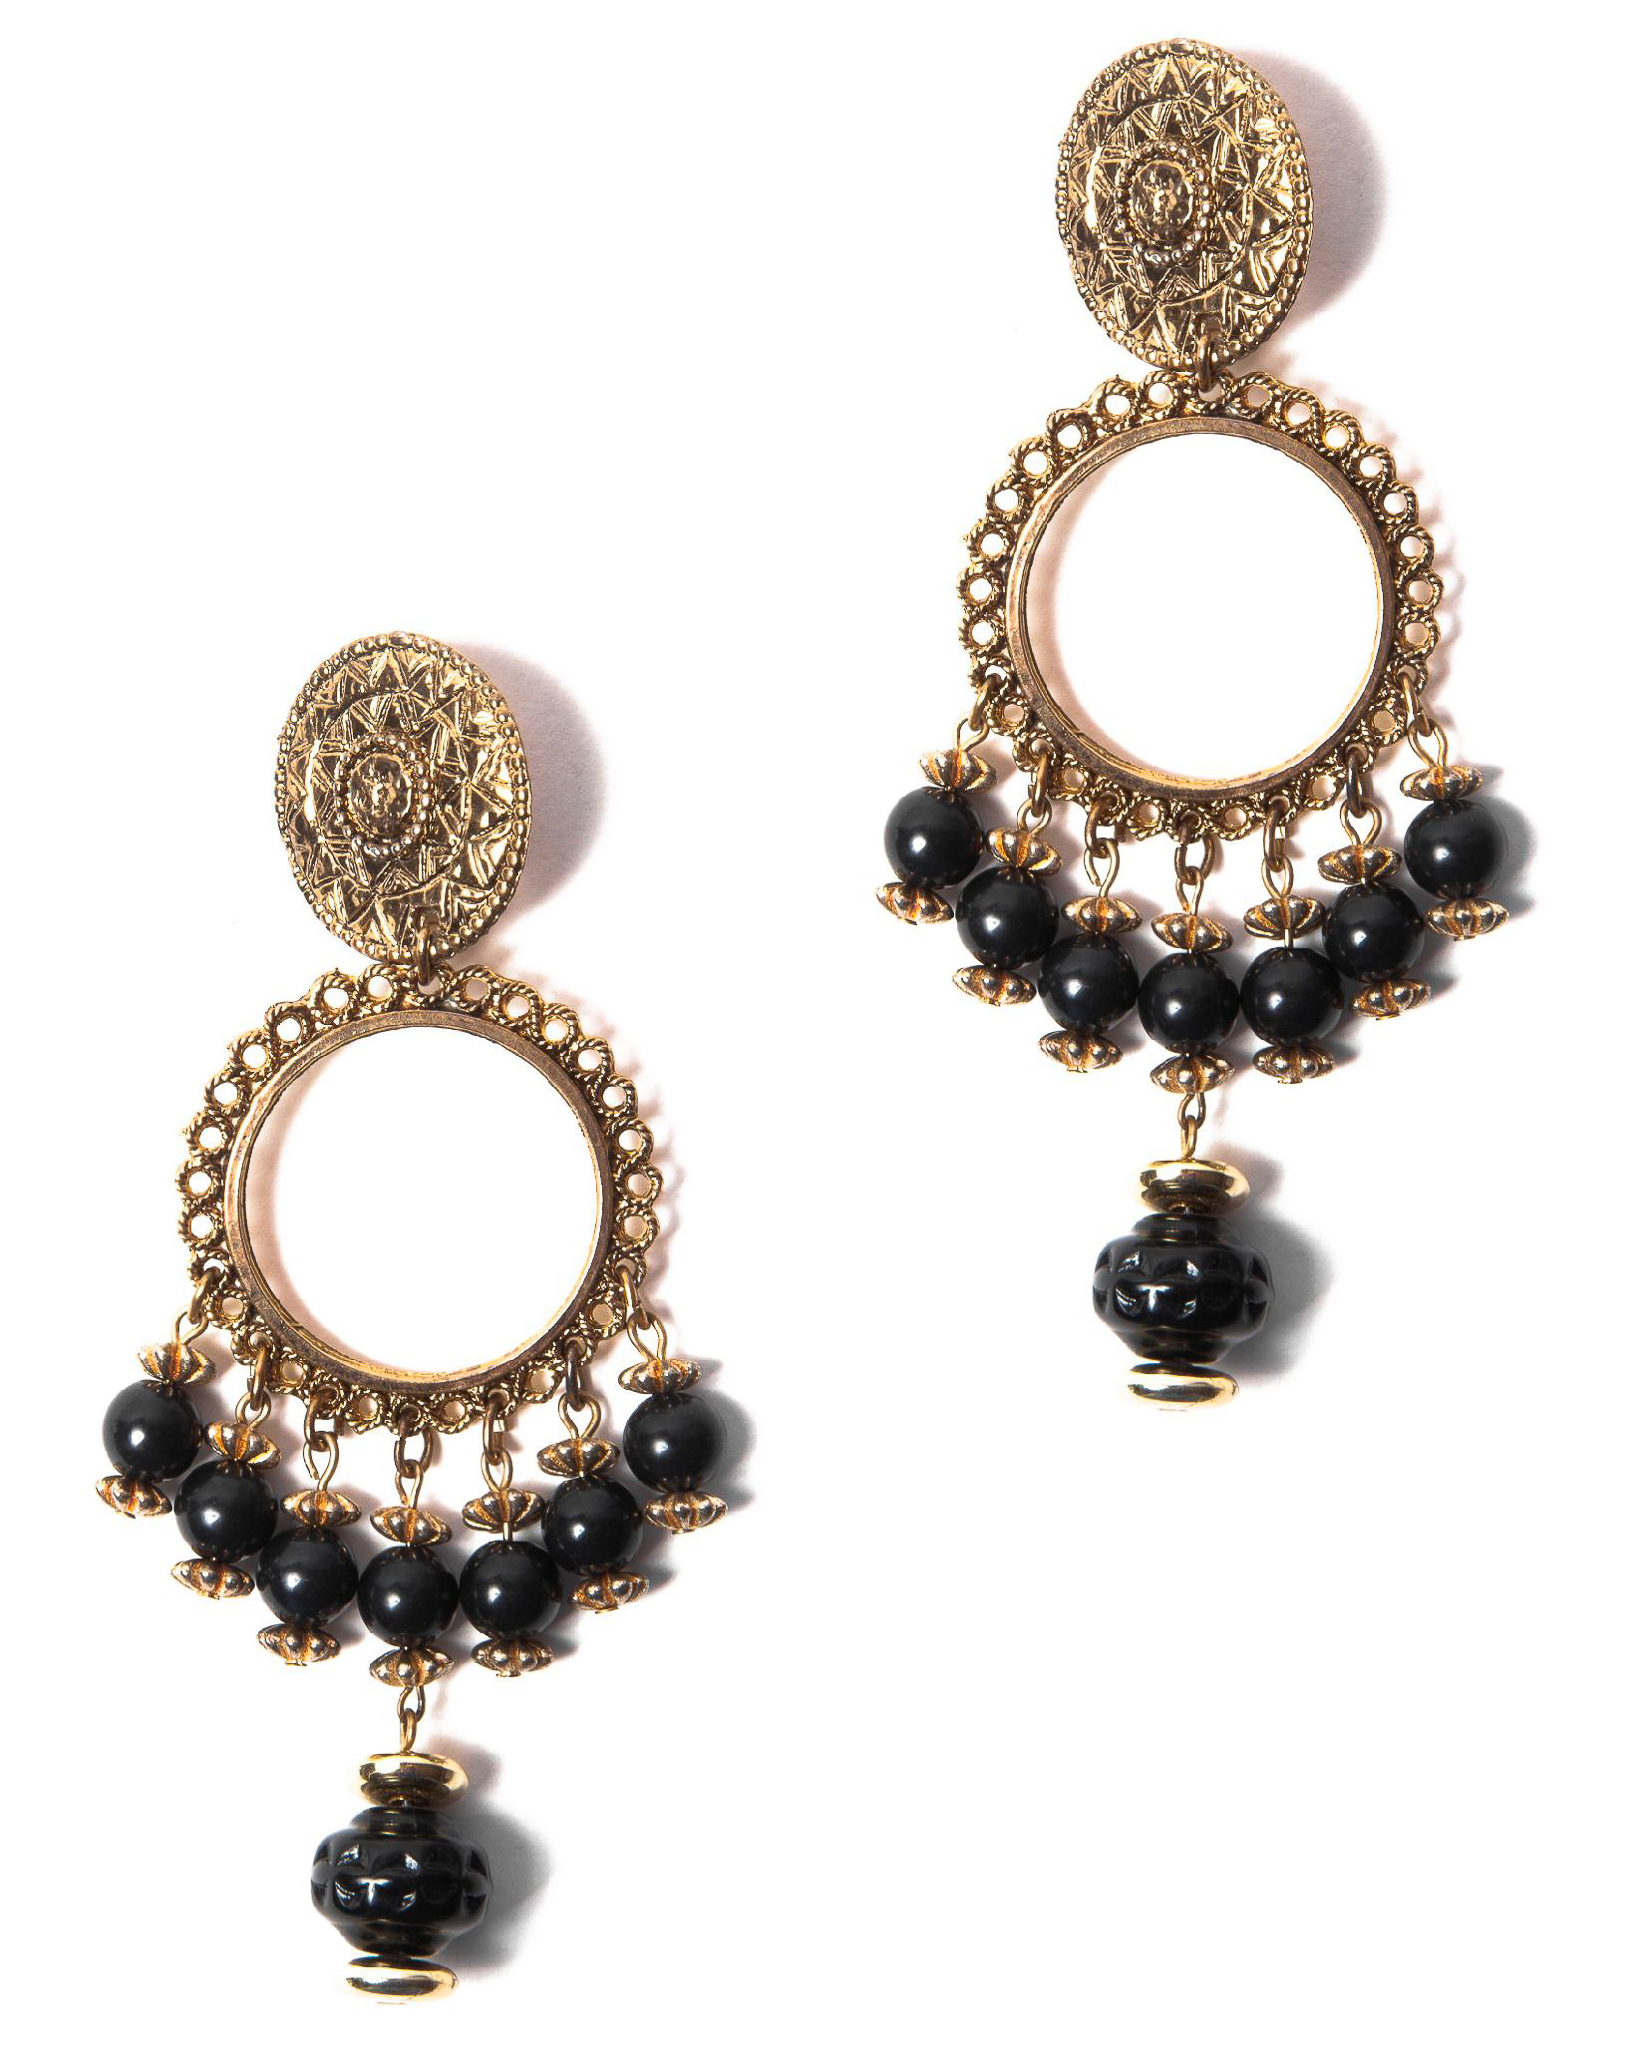 Black and Gold Beaded Gypsy Earrings, circa 1970’s - Haute Tramp